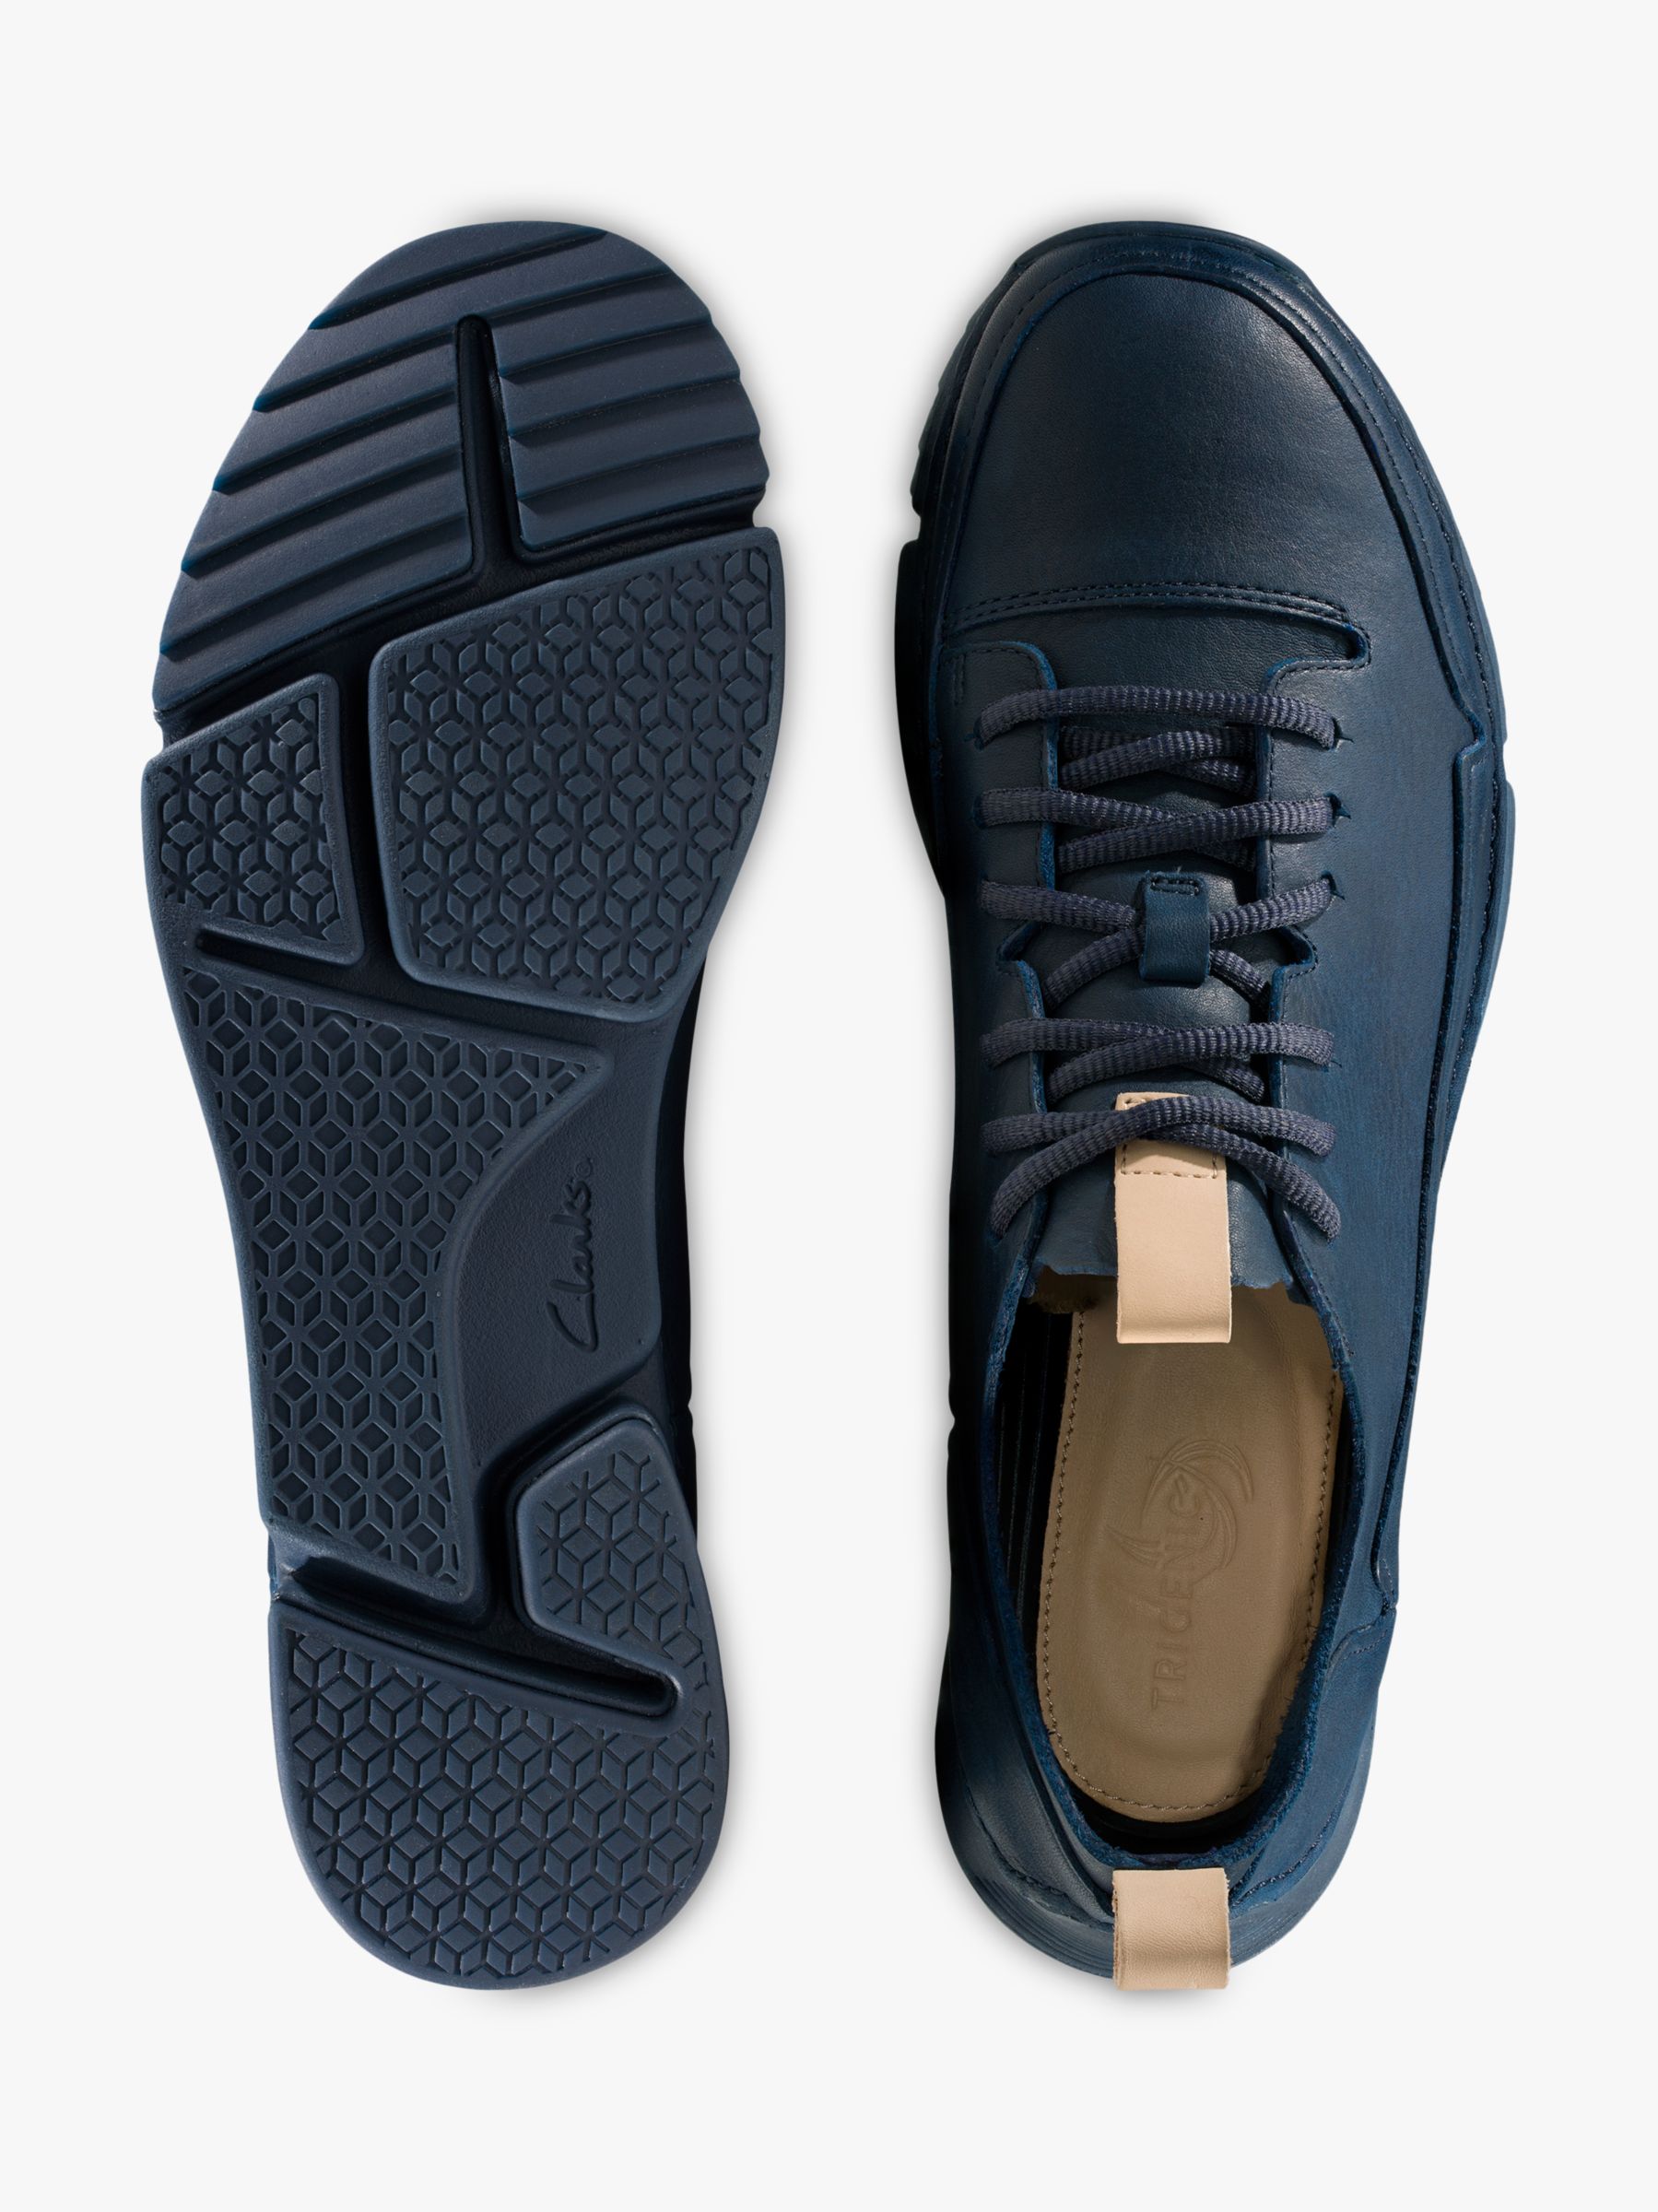 Clarks Tri Spark Leather Trainers at 